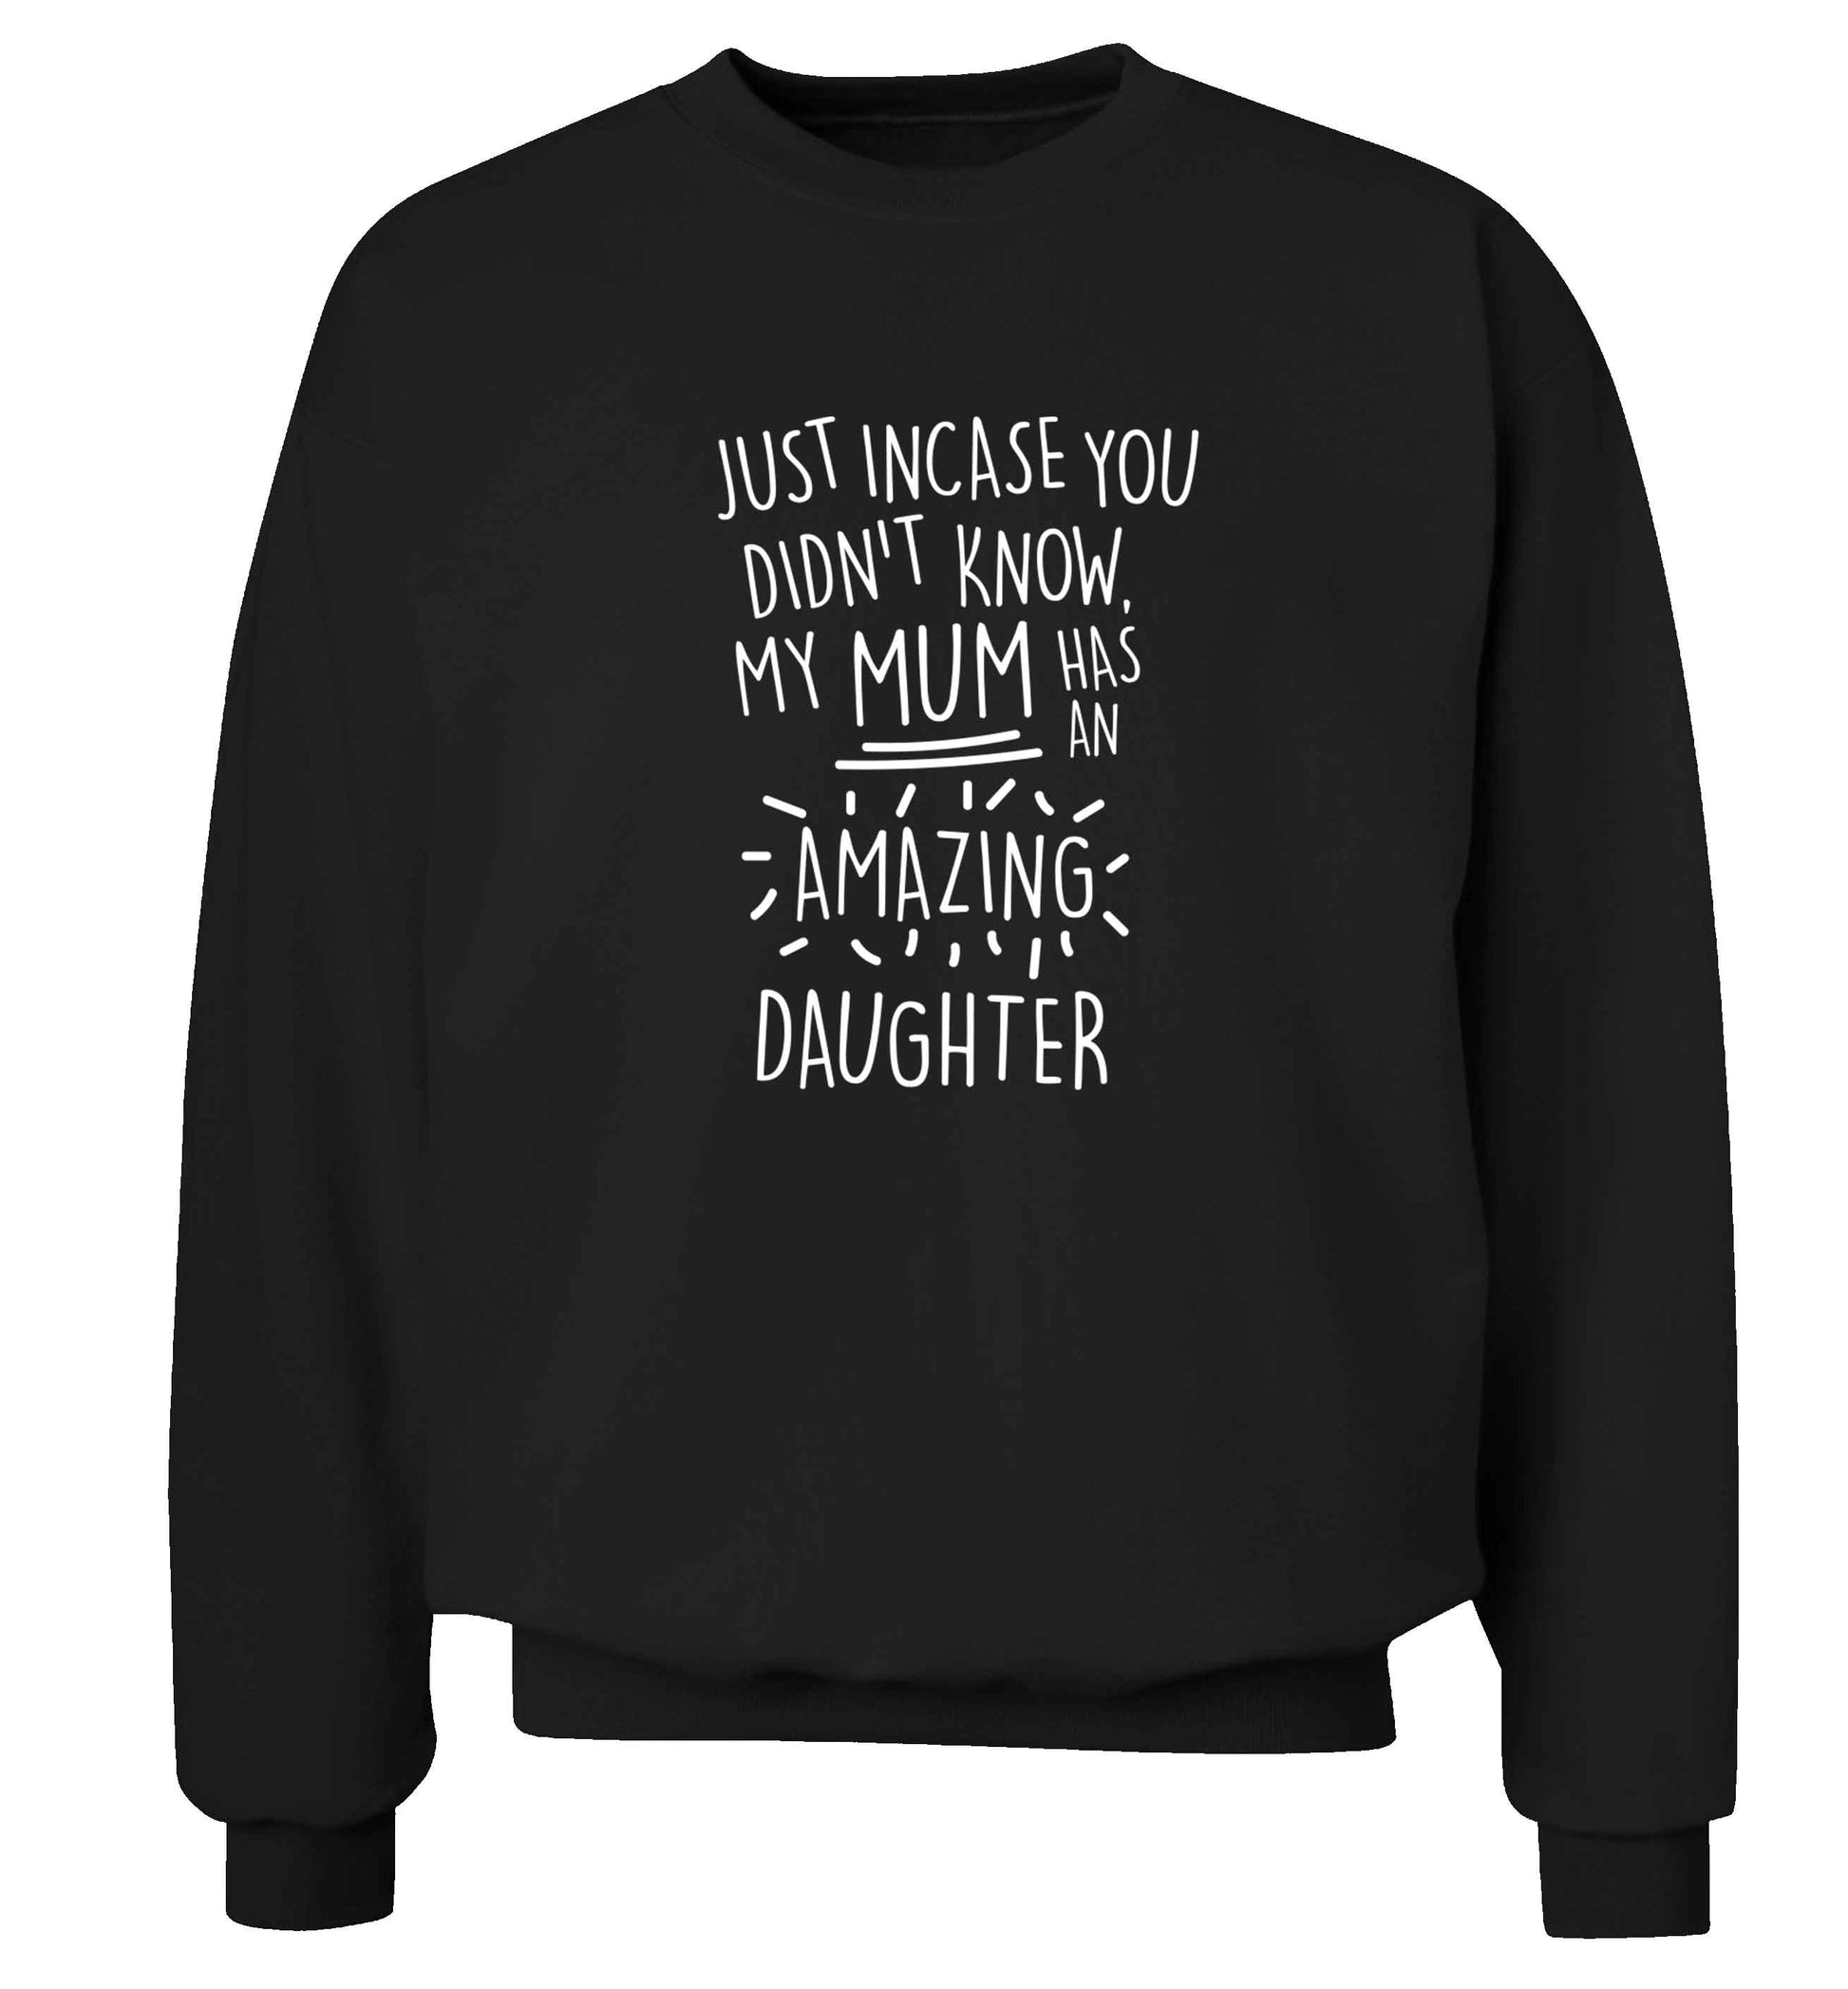 Just incase you didn't know my mum has an amazing daughter adult's unisex black sweater 2XL